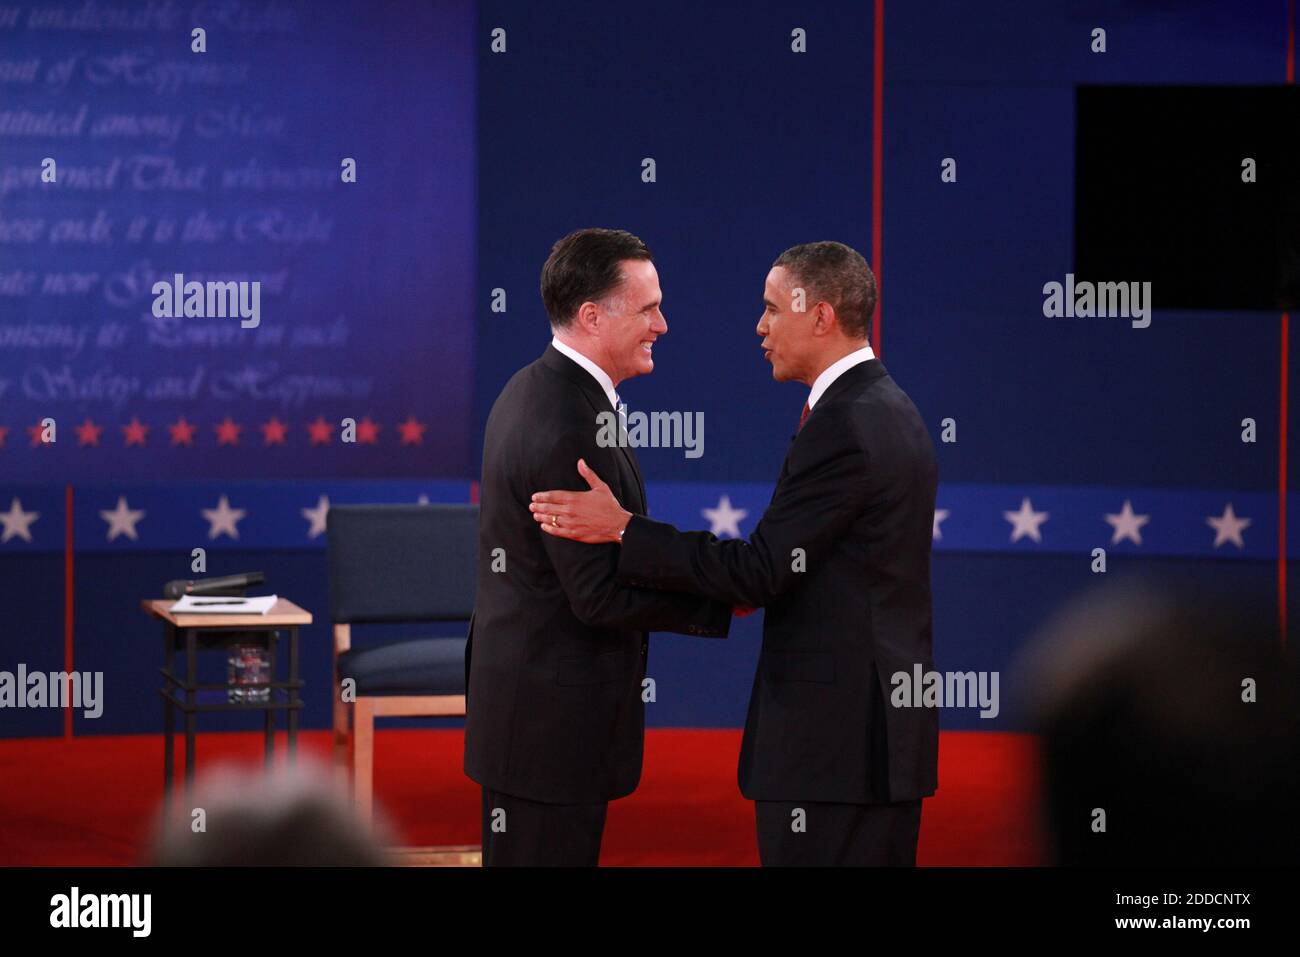 NO FILM, NO VIDEO, NO TV, NO DOCUMENTARY - President Barack Obama, right, and Republican presidential nominee Mitt Romney shake hands at the start of their second presidential debate at Hofstra University in Hempstead, New York USA, on Tuesday, October 16, 2012. Photo by John Paraskevas/Newsday/MCT/ABACAPRESS.COM Stock Photo